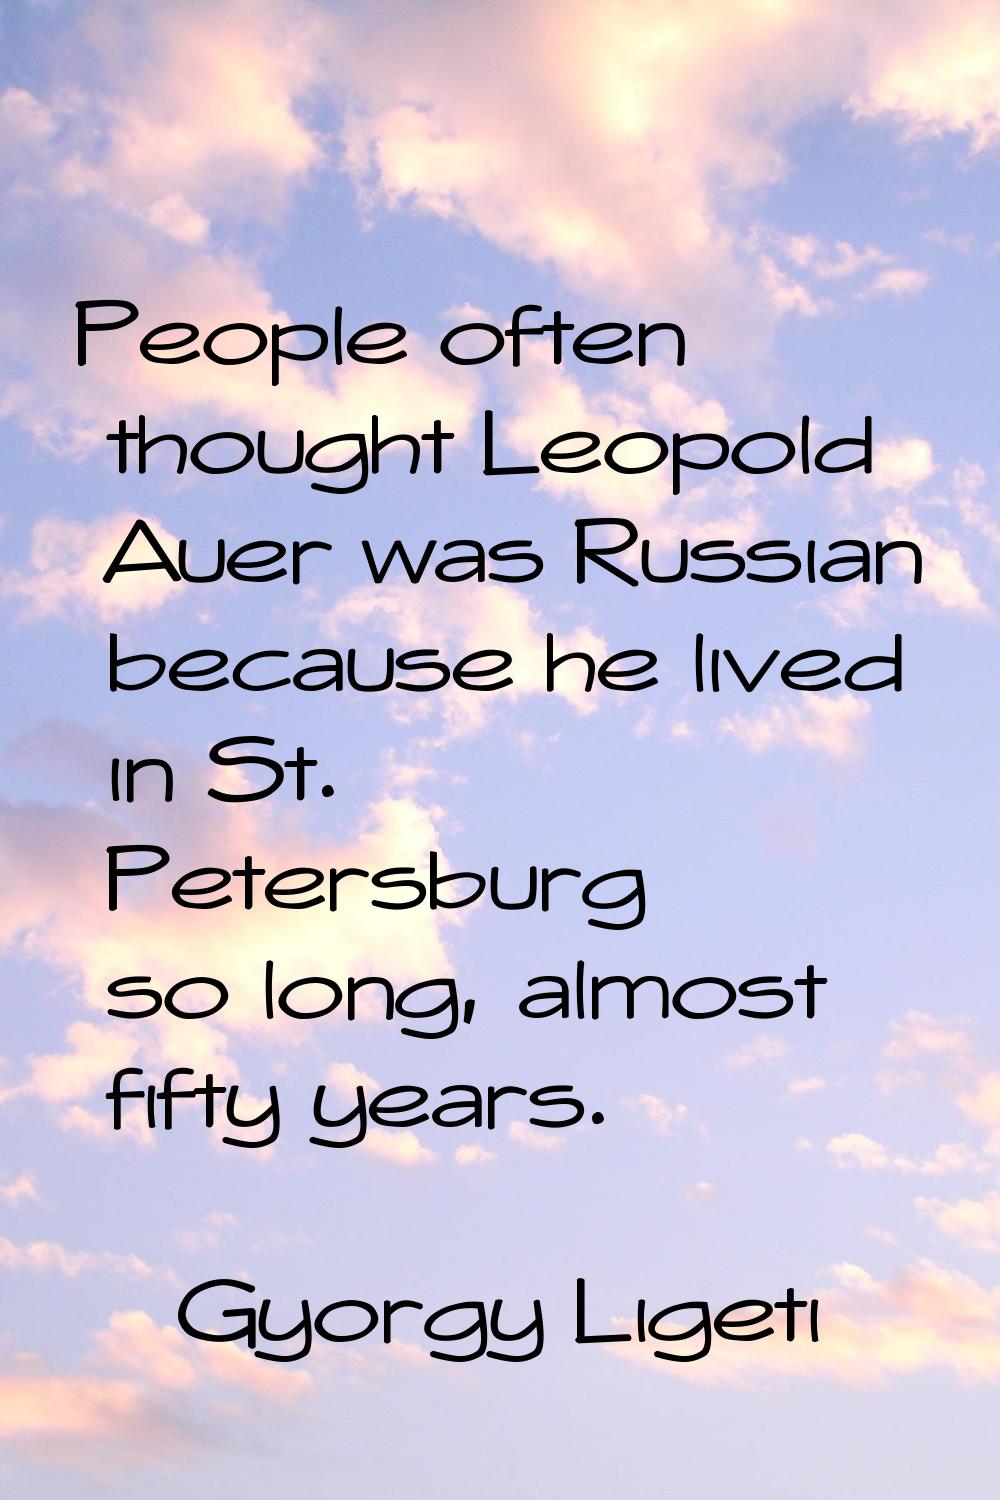 People often thought Leopold Auer was Russian because he lived in St. Petersburg so long, almost fi